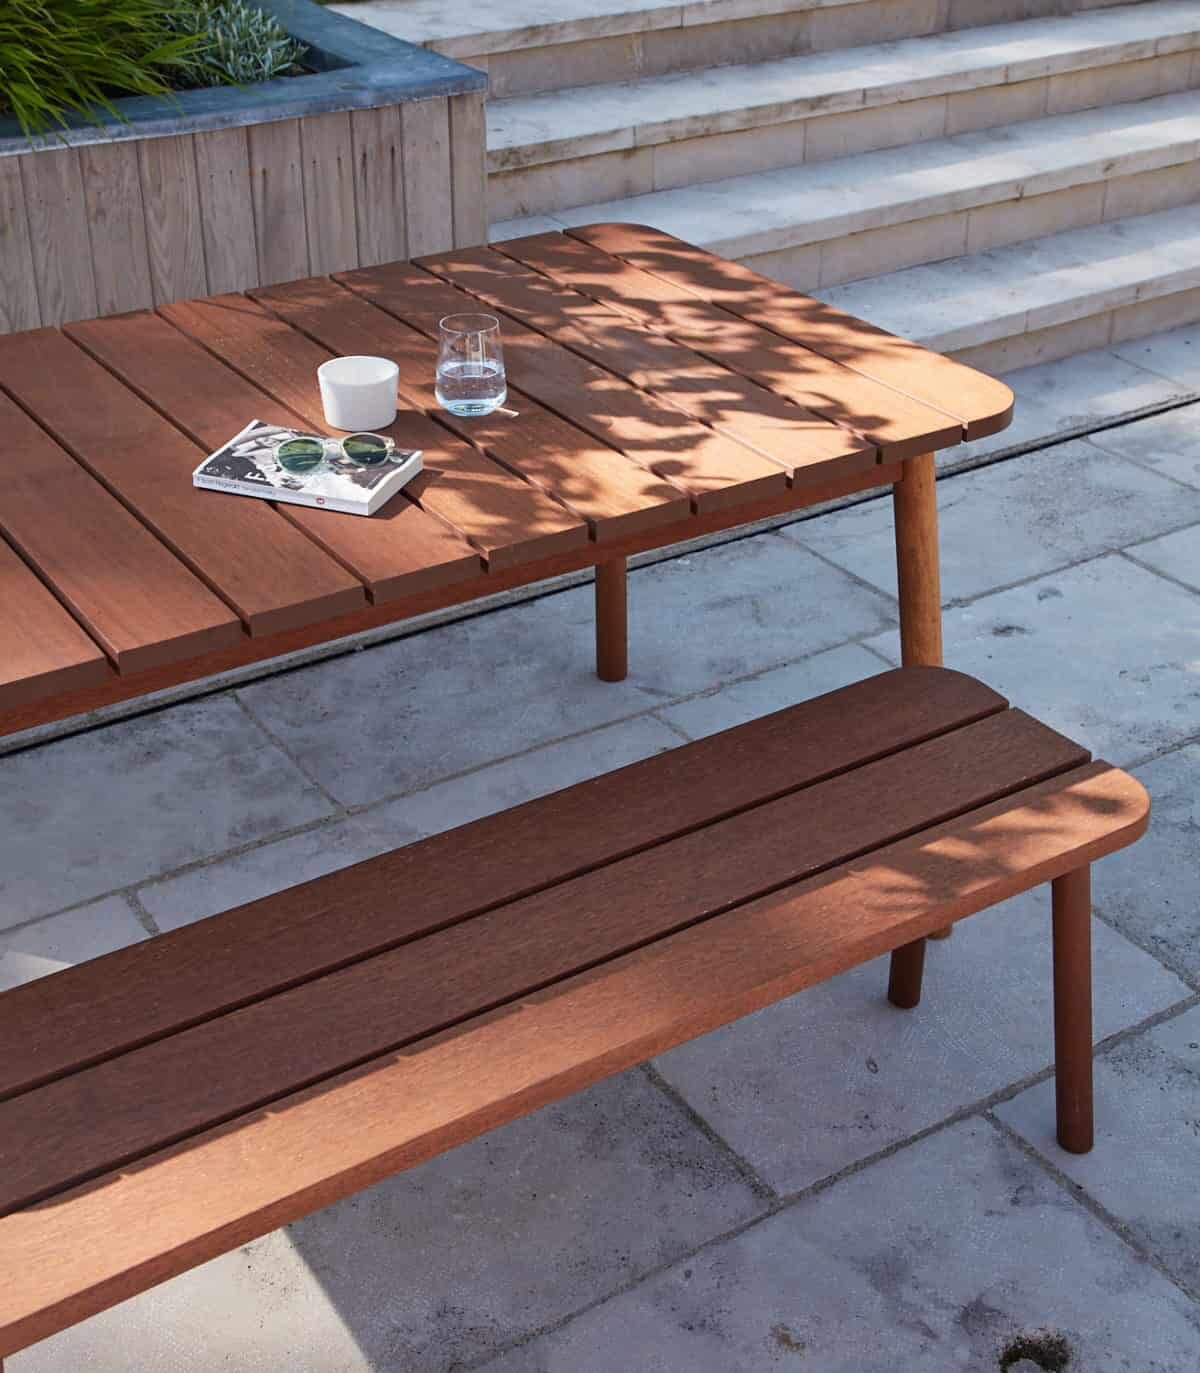 Semley Outdoor Table by Another Country